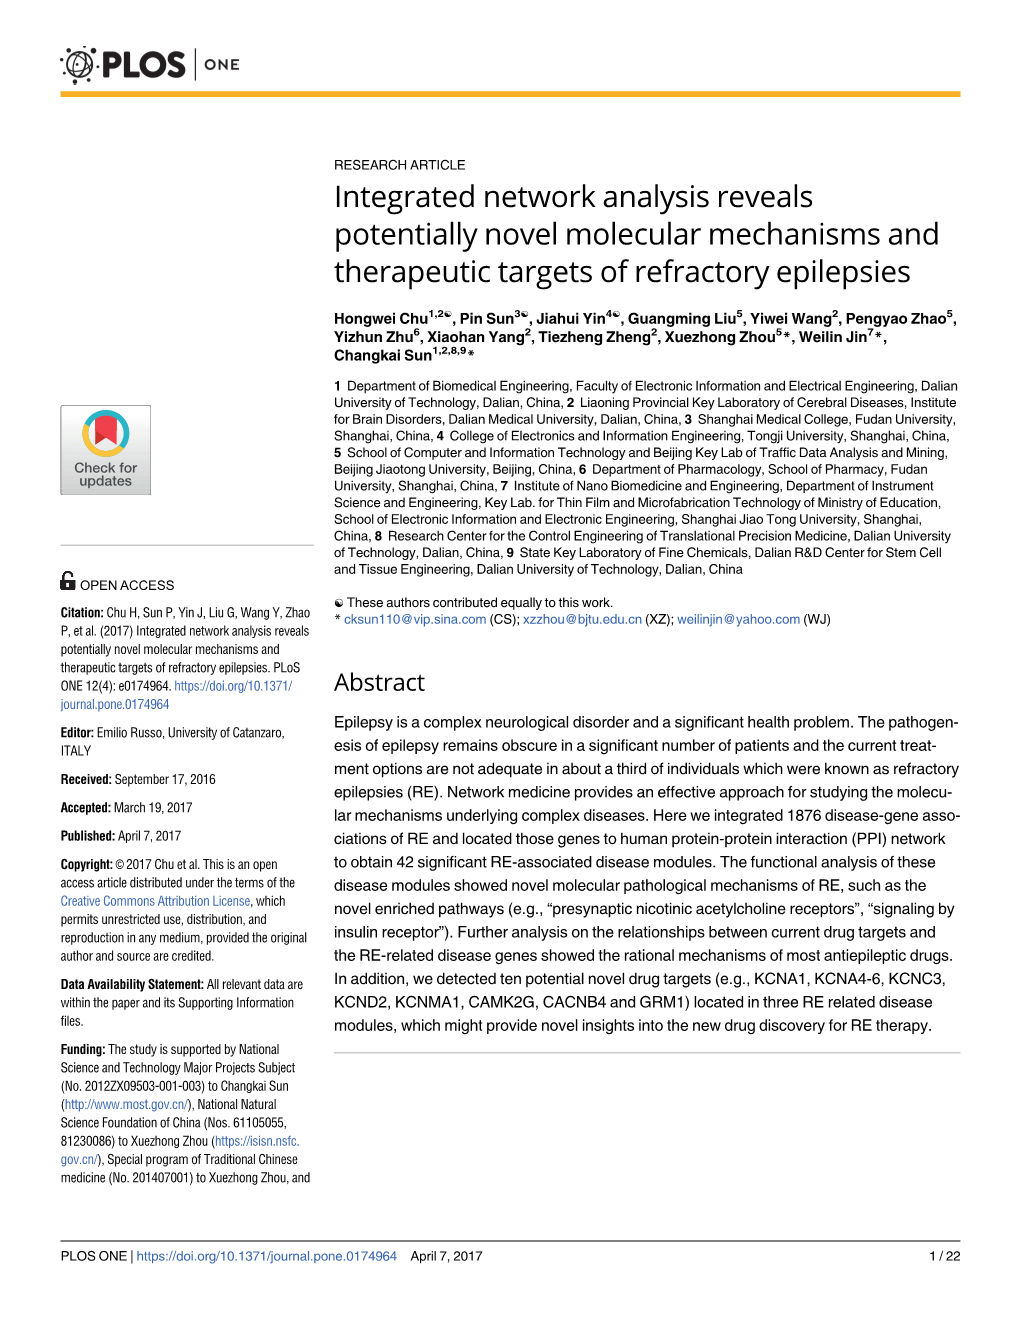 Integrated Network Analysis Reveals Potentially Novel Molecular Mechanisms and Therapeutic Targets of Refractory Epilepsies